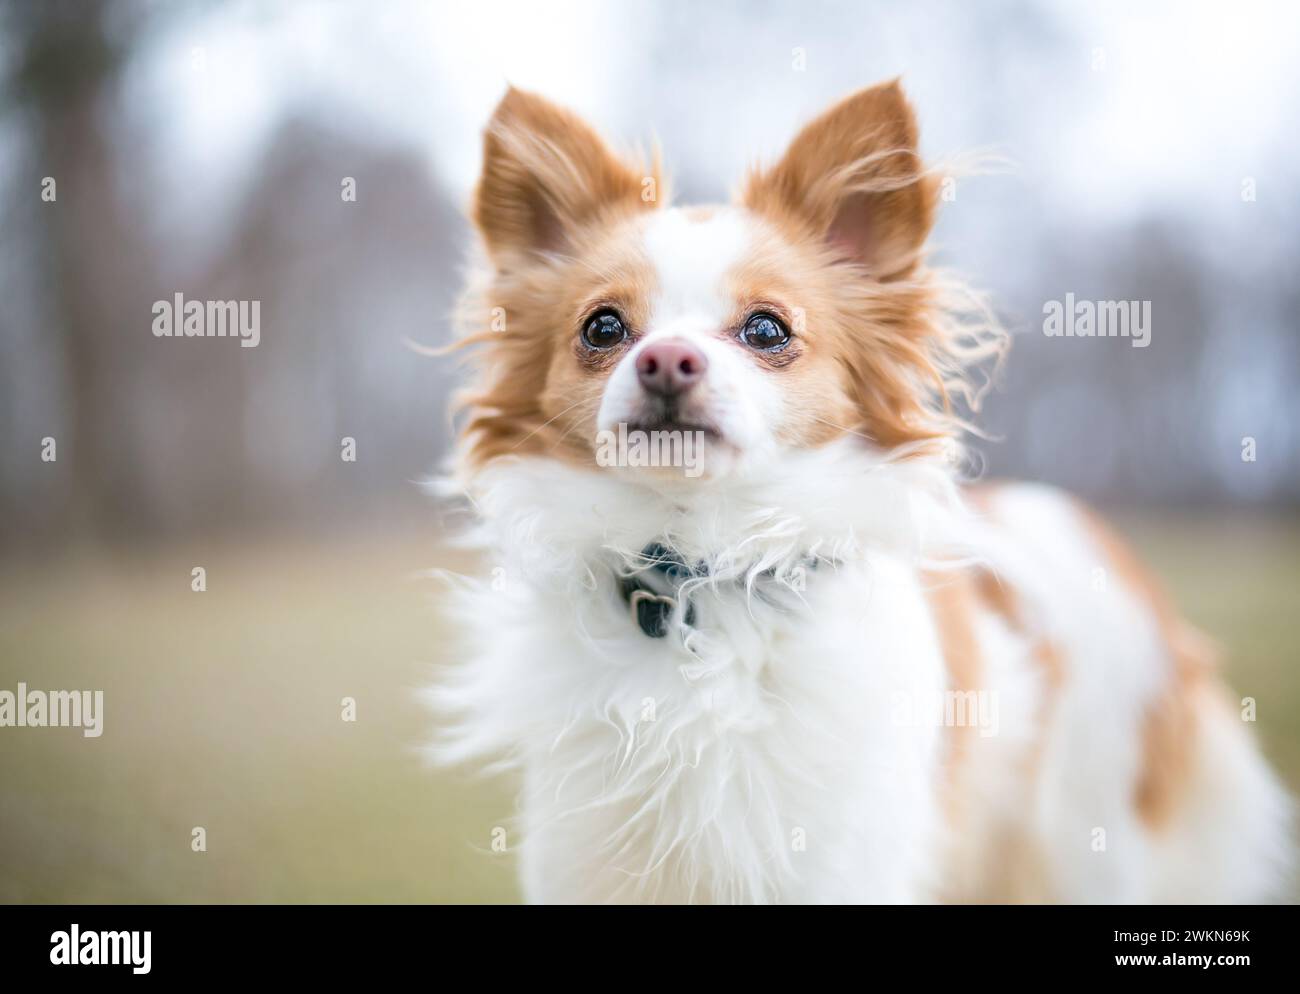 A cute red and white Long-haired Chihuahua x Papillon mixed breed dog Stock Photo